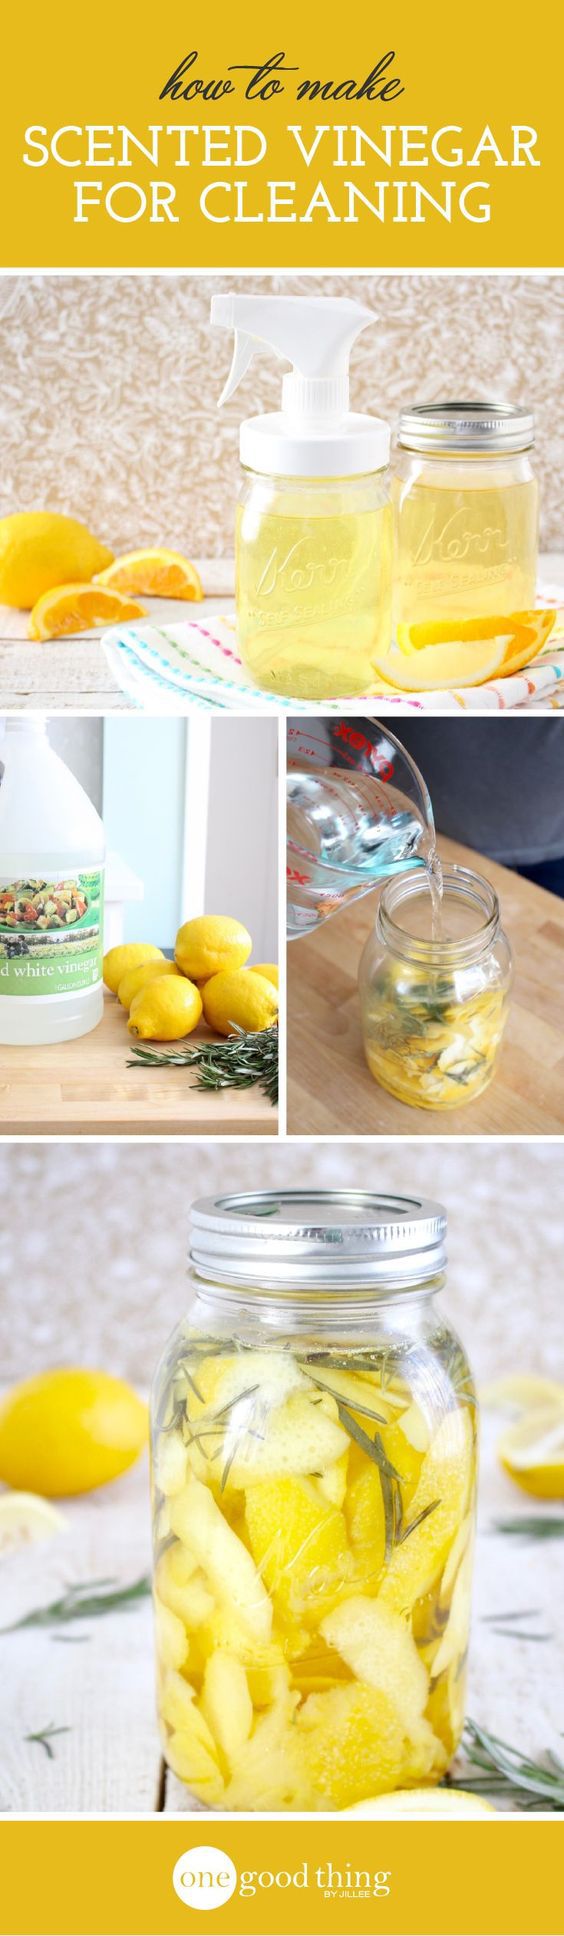 8 Genius Cleaning Hacks To Save You Time 11